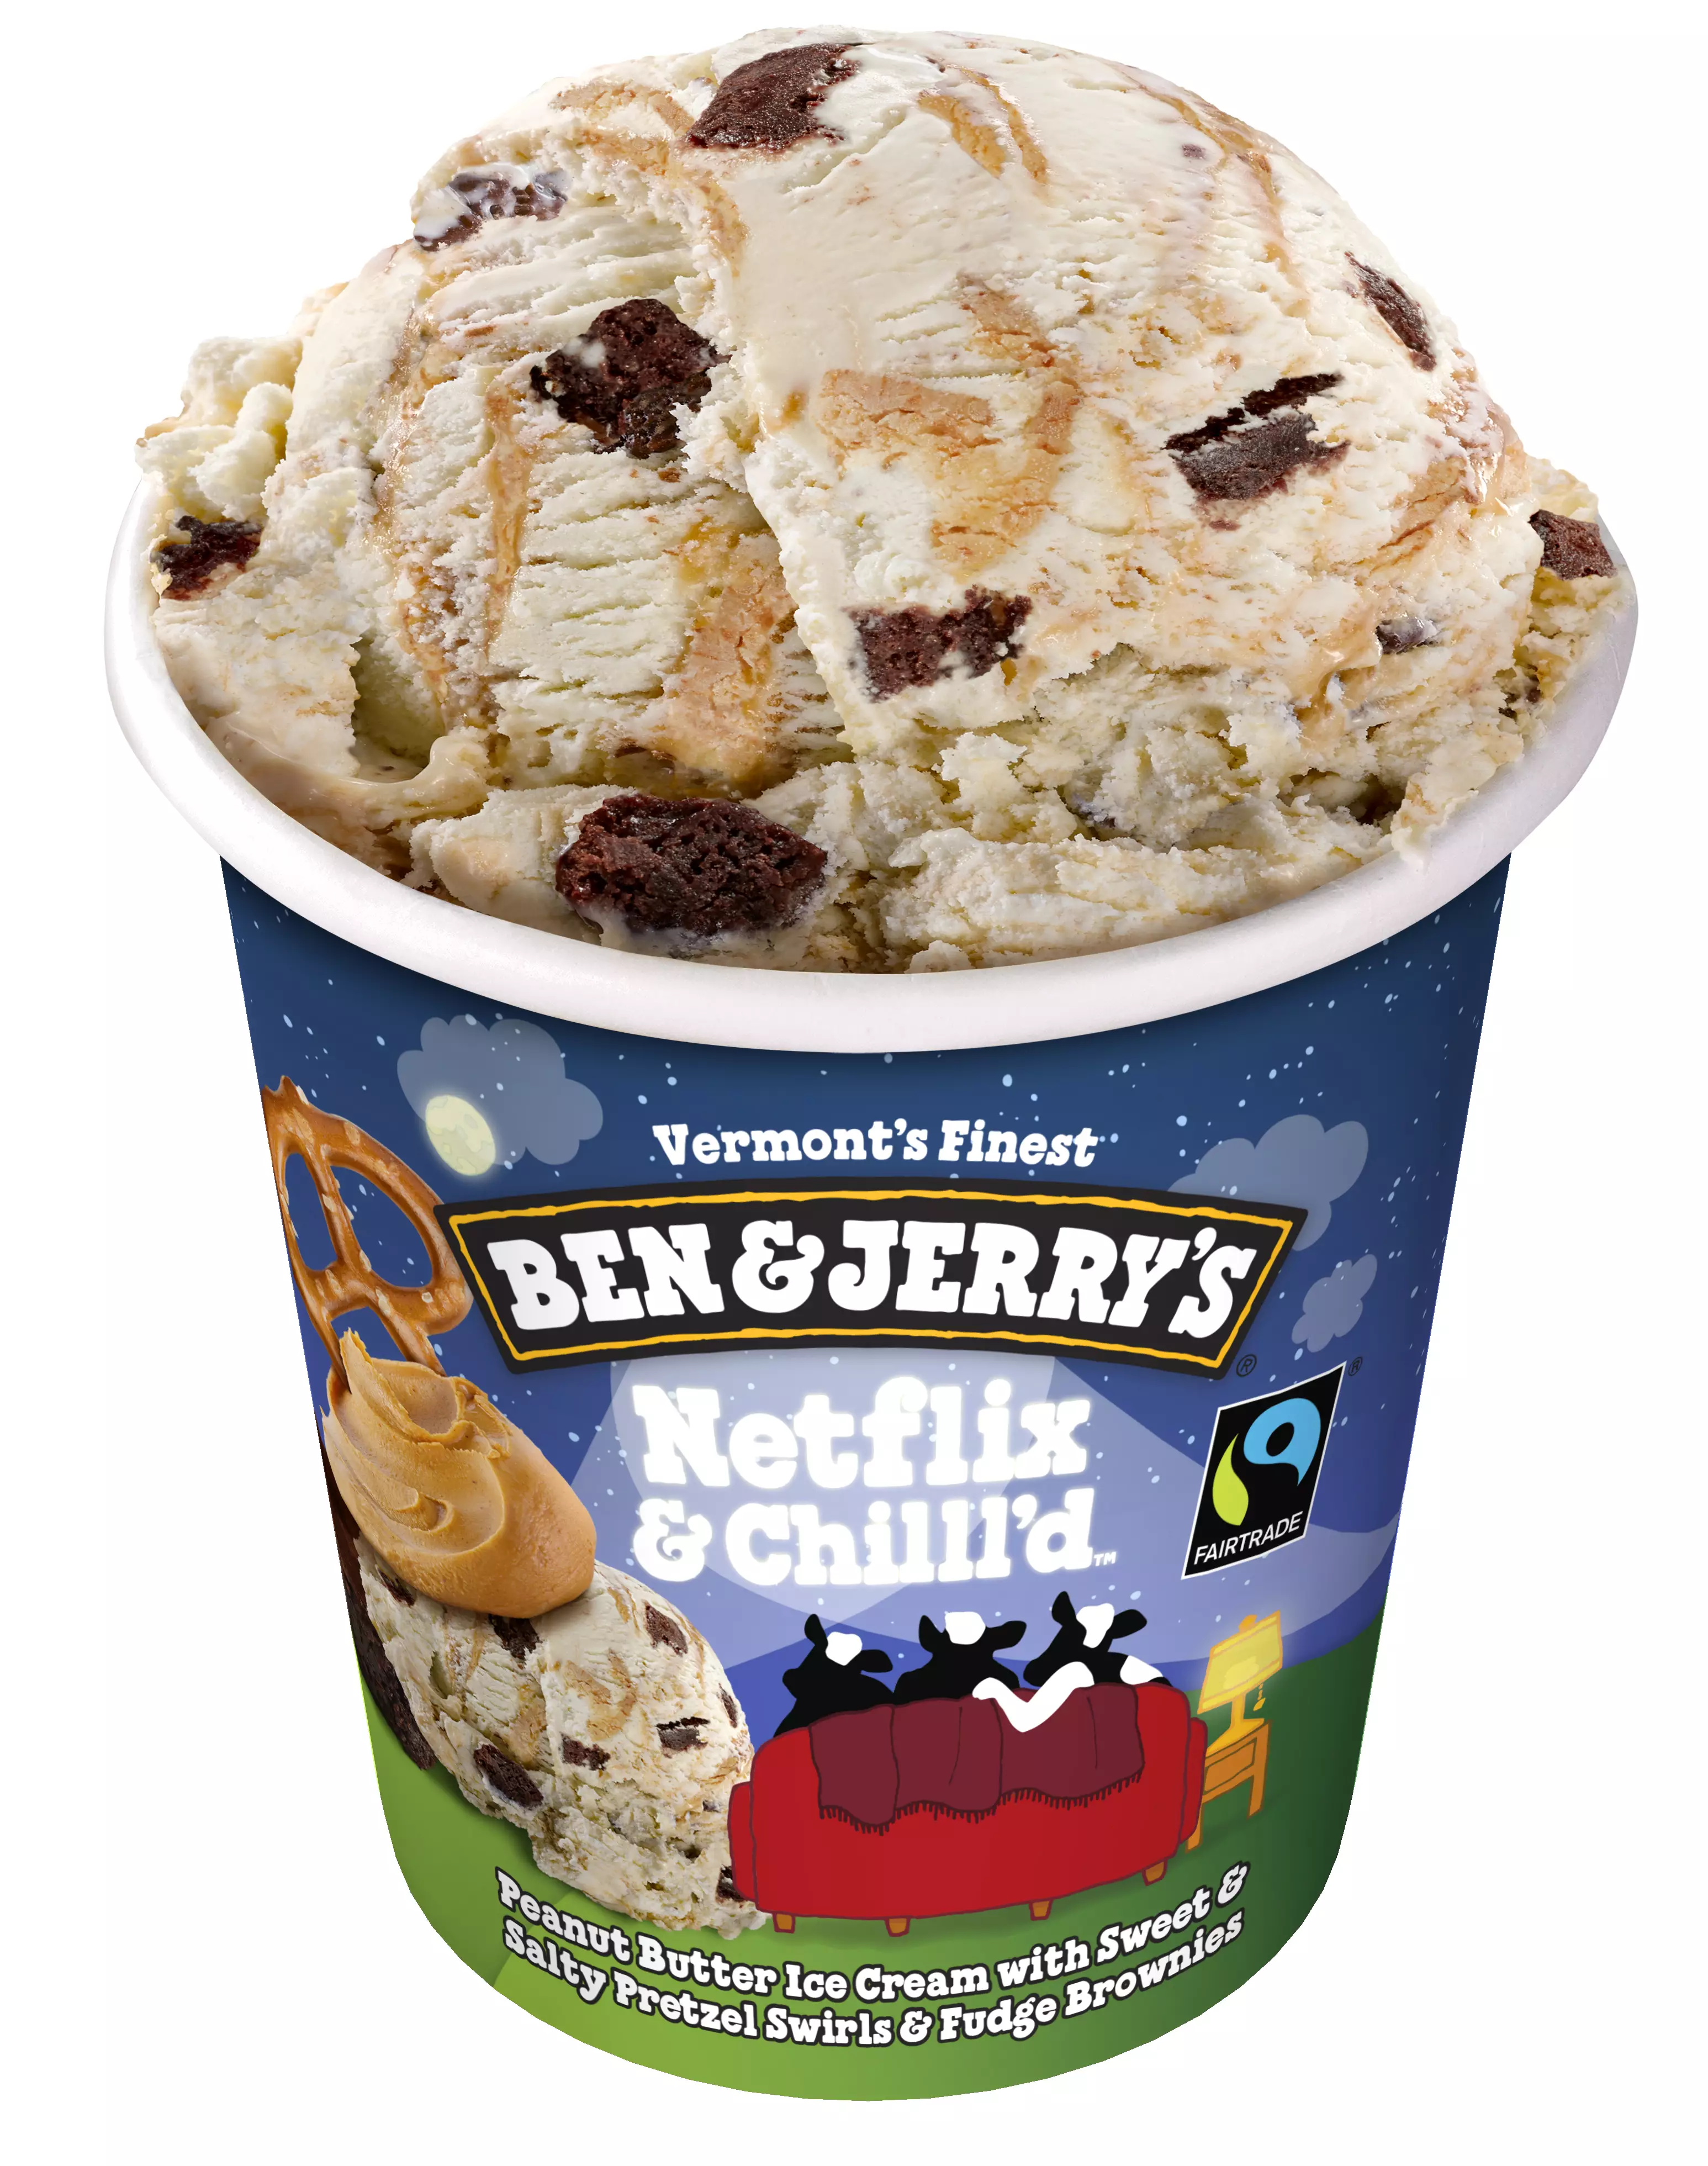 Peanut butter ice-cream with sweet and salty pretzels and brownie pieces sounds dreamy (